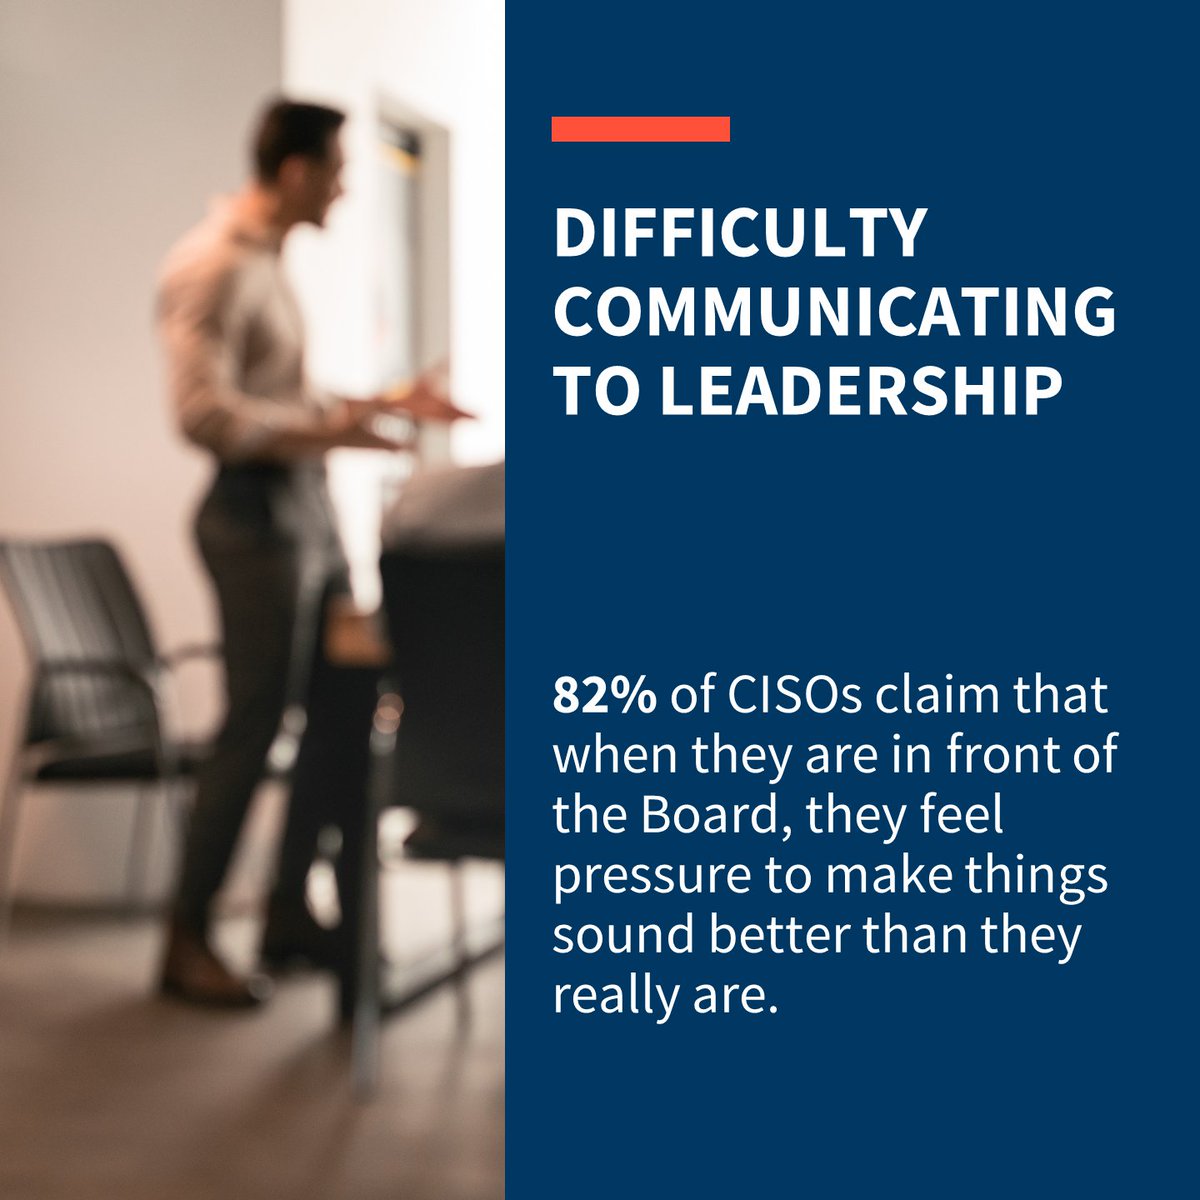 Our latest survey underscores the critical impact and prevalence of miscommunication between Chief Information Security Officers and Boards of Directors. Learn more about the disconnect and how to improve it: bit.ly/3NgGPz5 #CISO #Cybersecurity